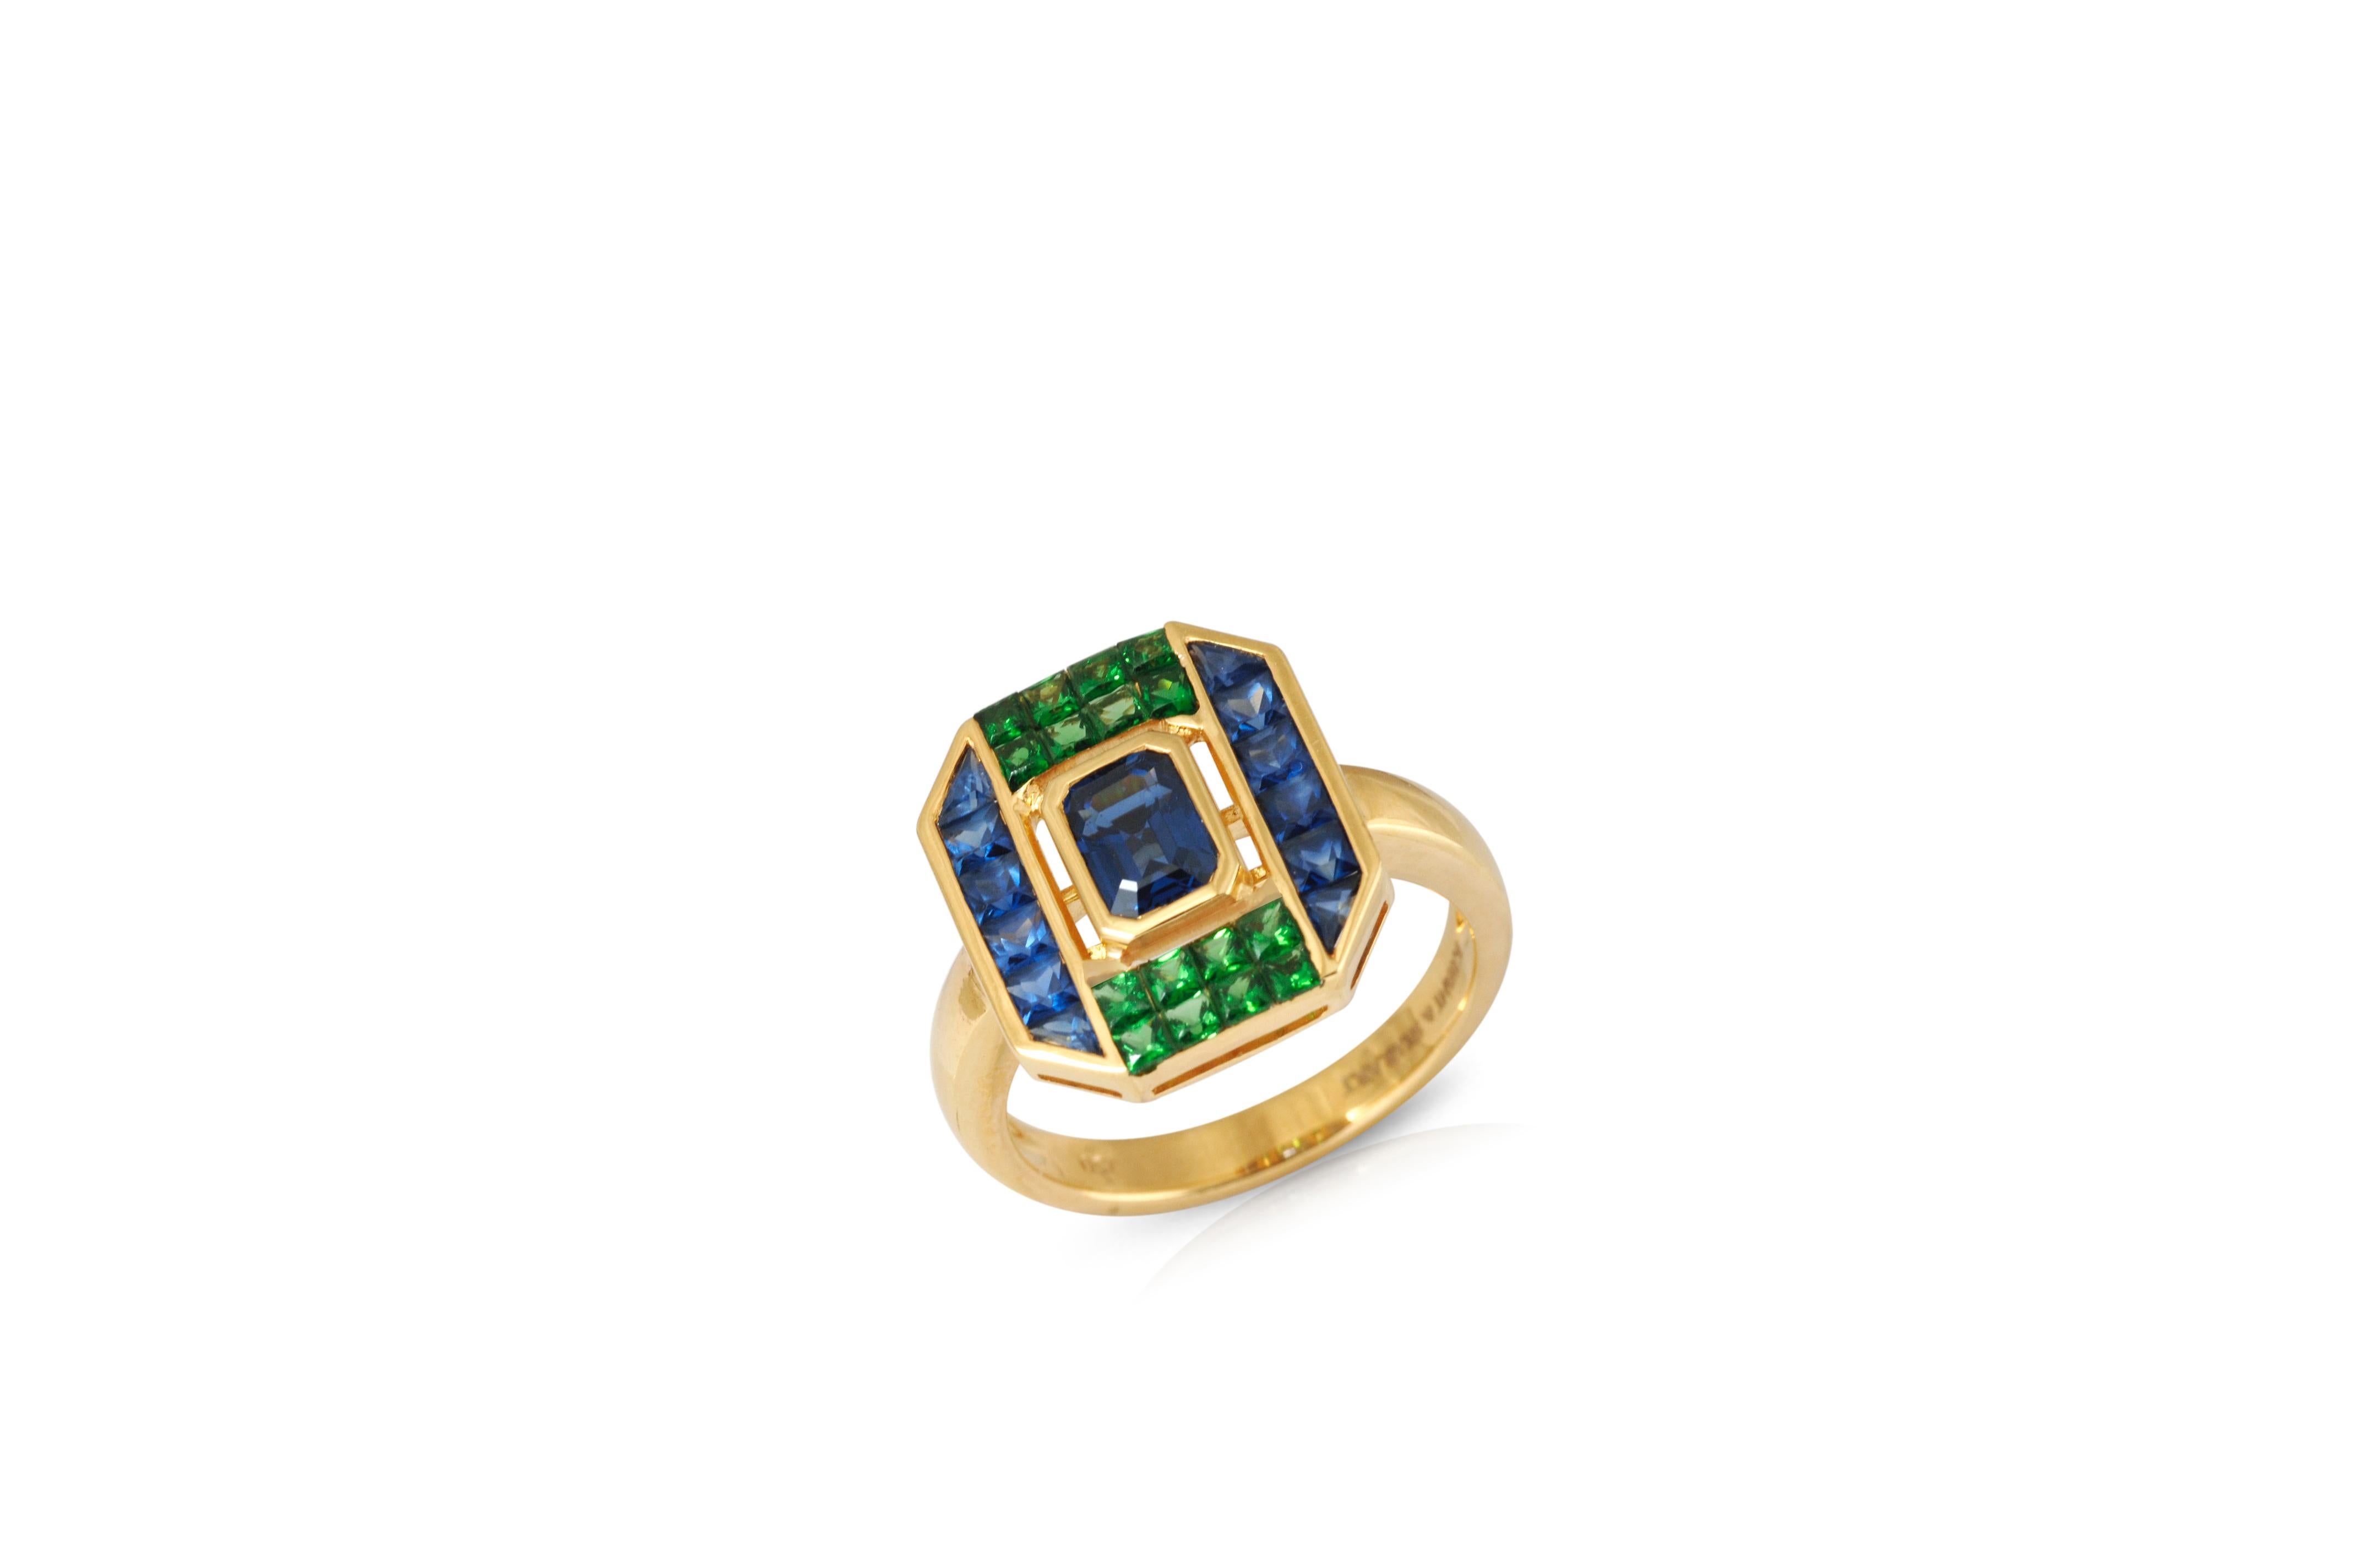 Blue Sapphire 1.34 carats with Tsavorite 0.65 carat and Blue Sapphire 0.79 carat Ring set in 18 Karat Gold Settings

Width:  1.4 cm 
Length:  1.5 cm
Ring Size: 52
Total Weight: 5.77 grams

